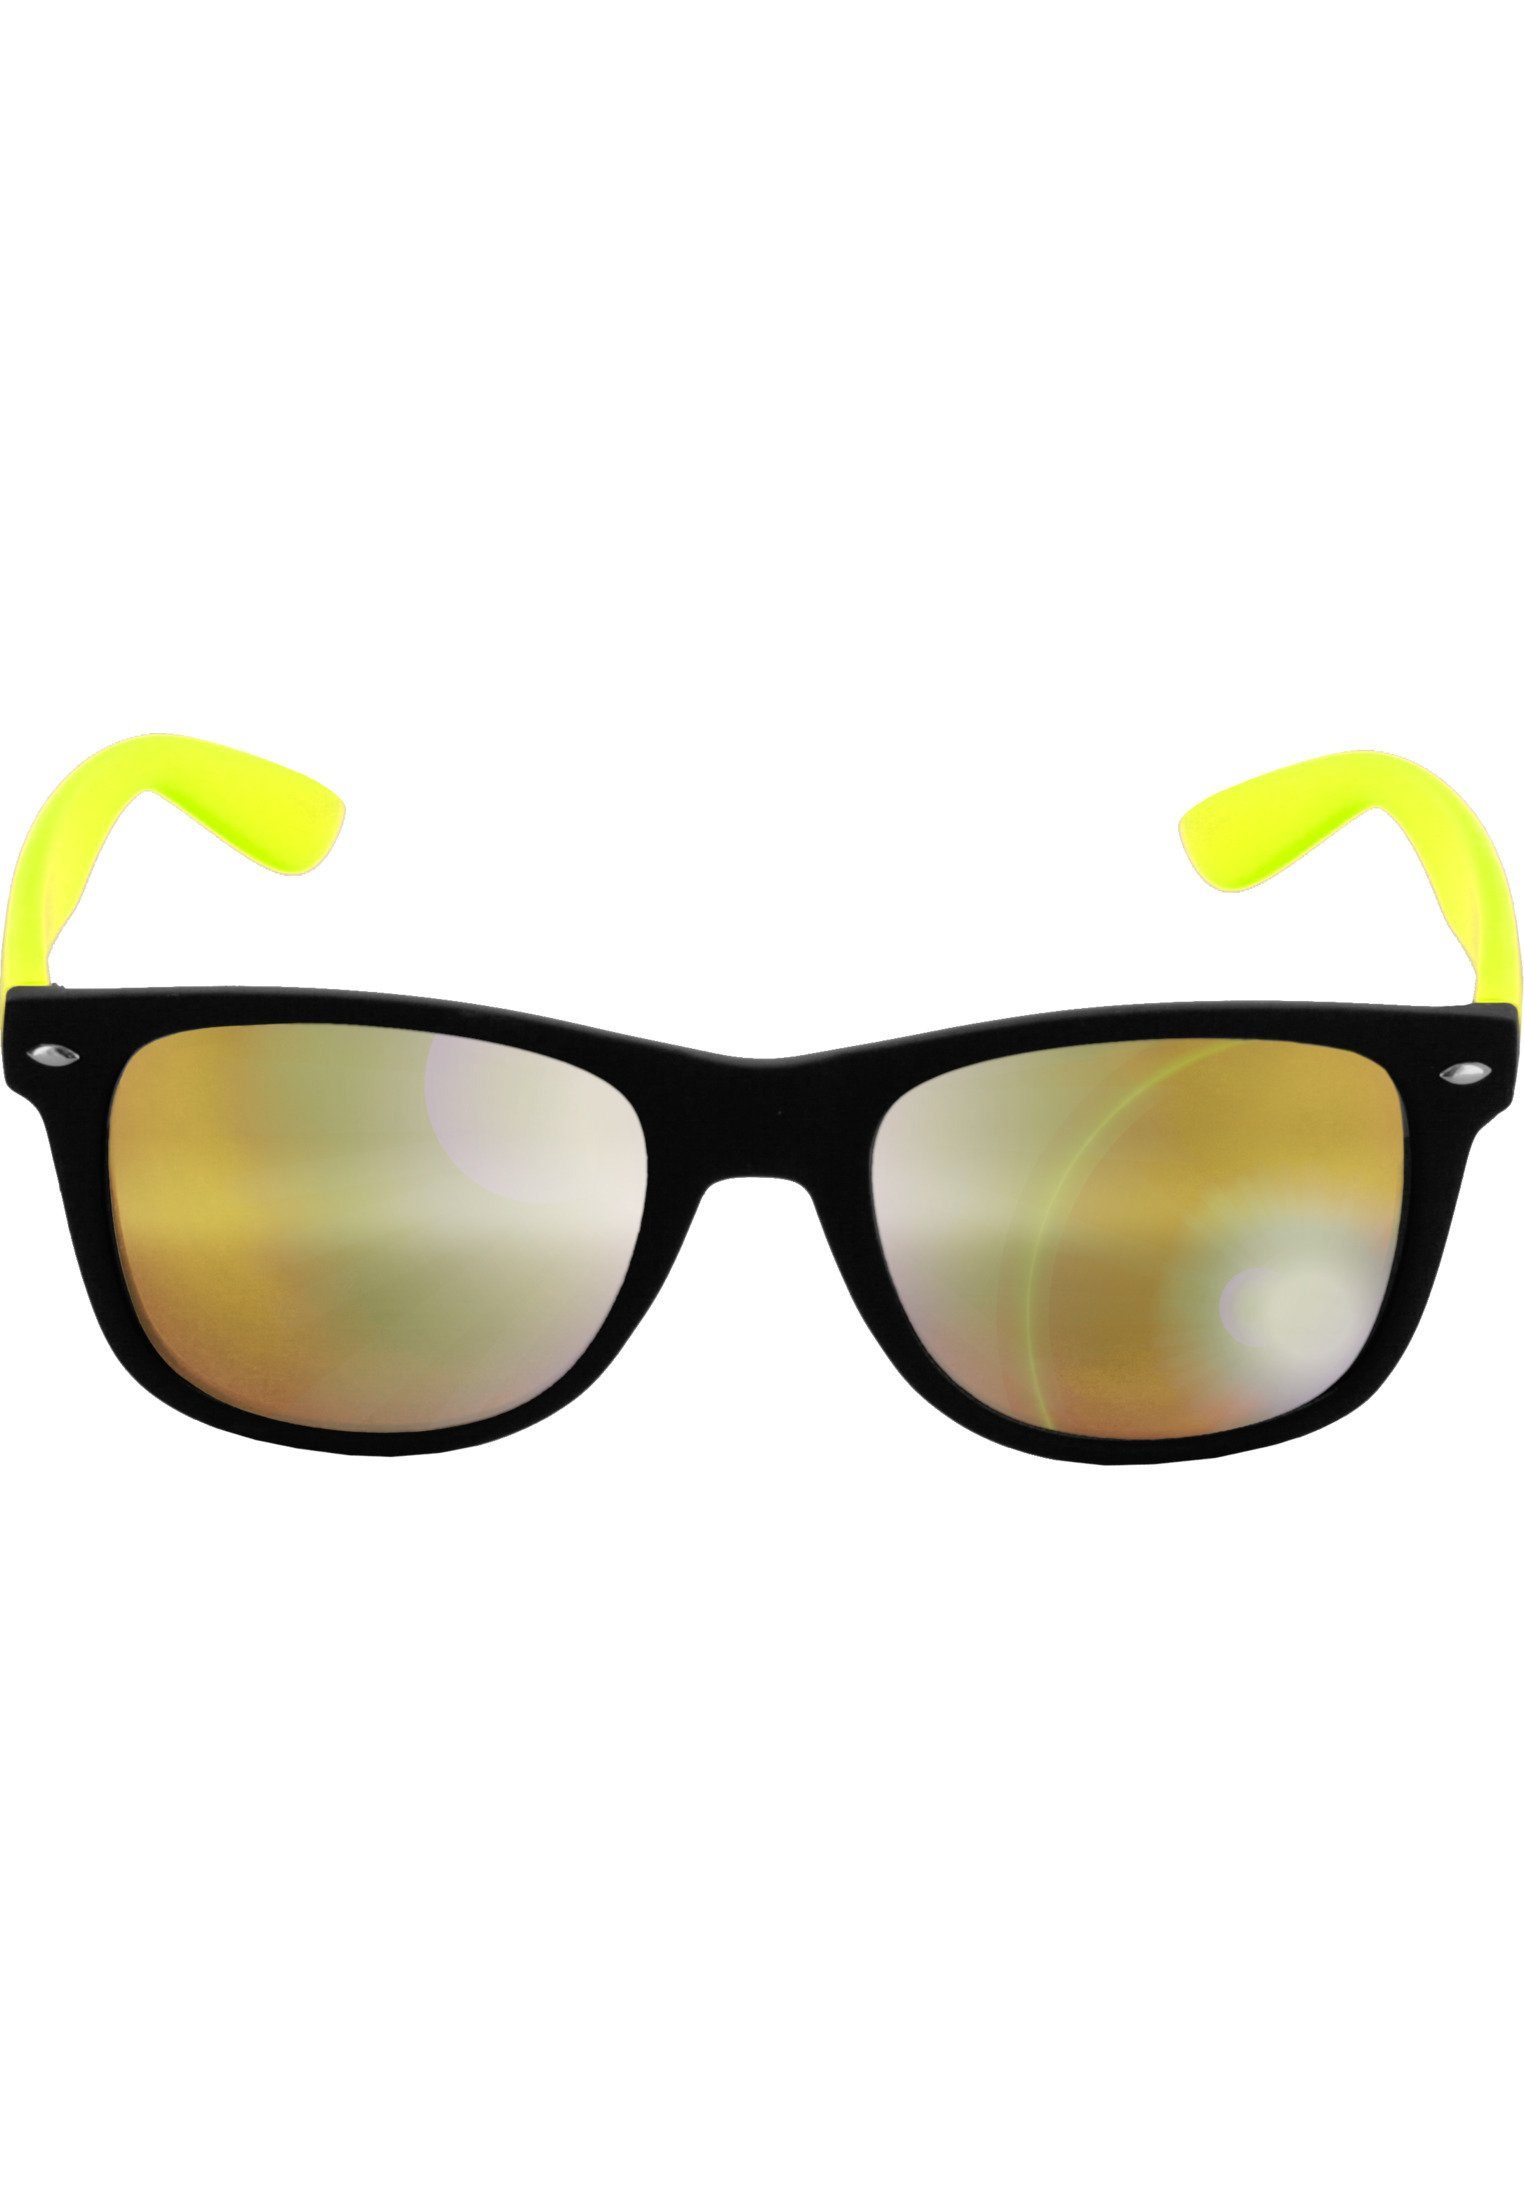 Accessoires Mirror Sonnenbrille blk/ylw/ylw Likoma Sunglasses MSTRDS